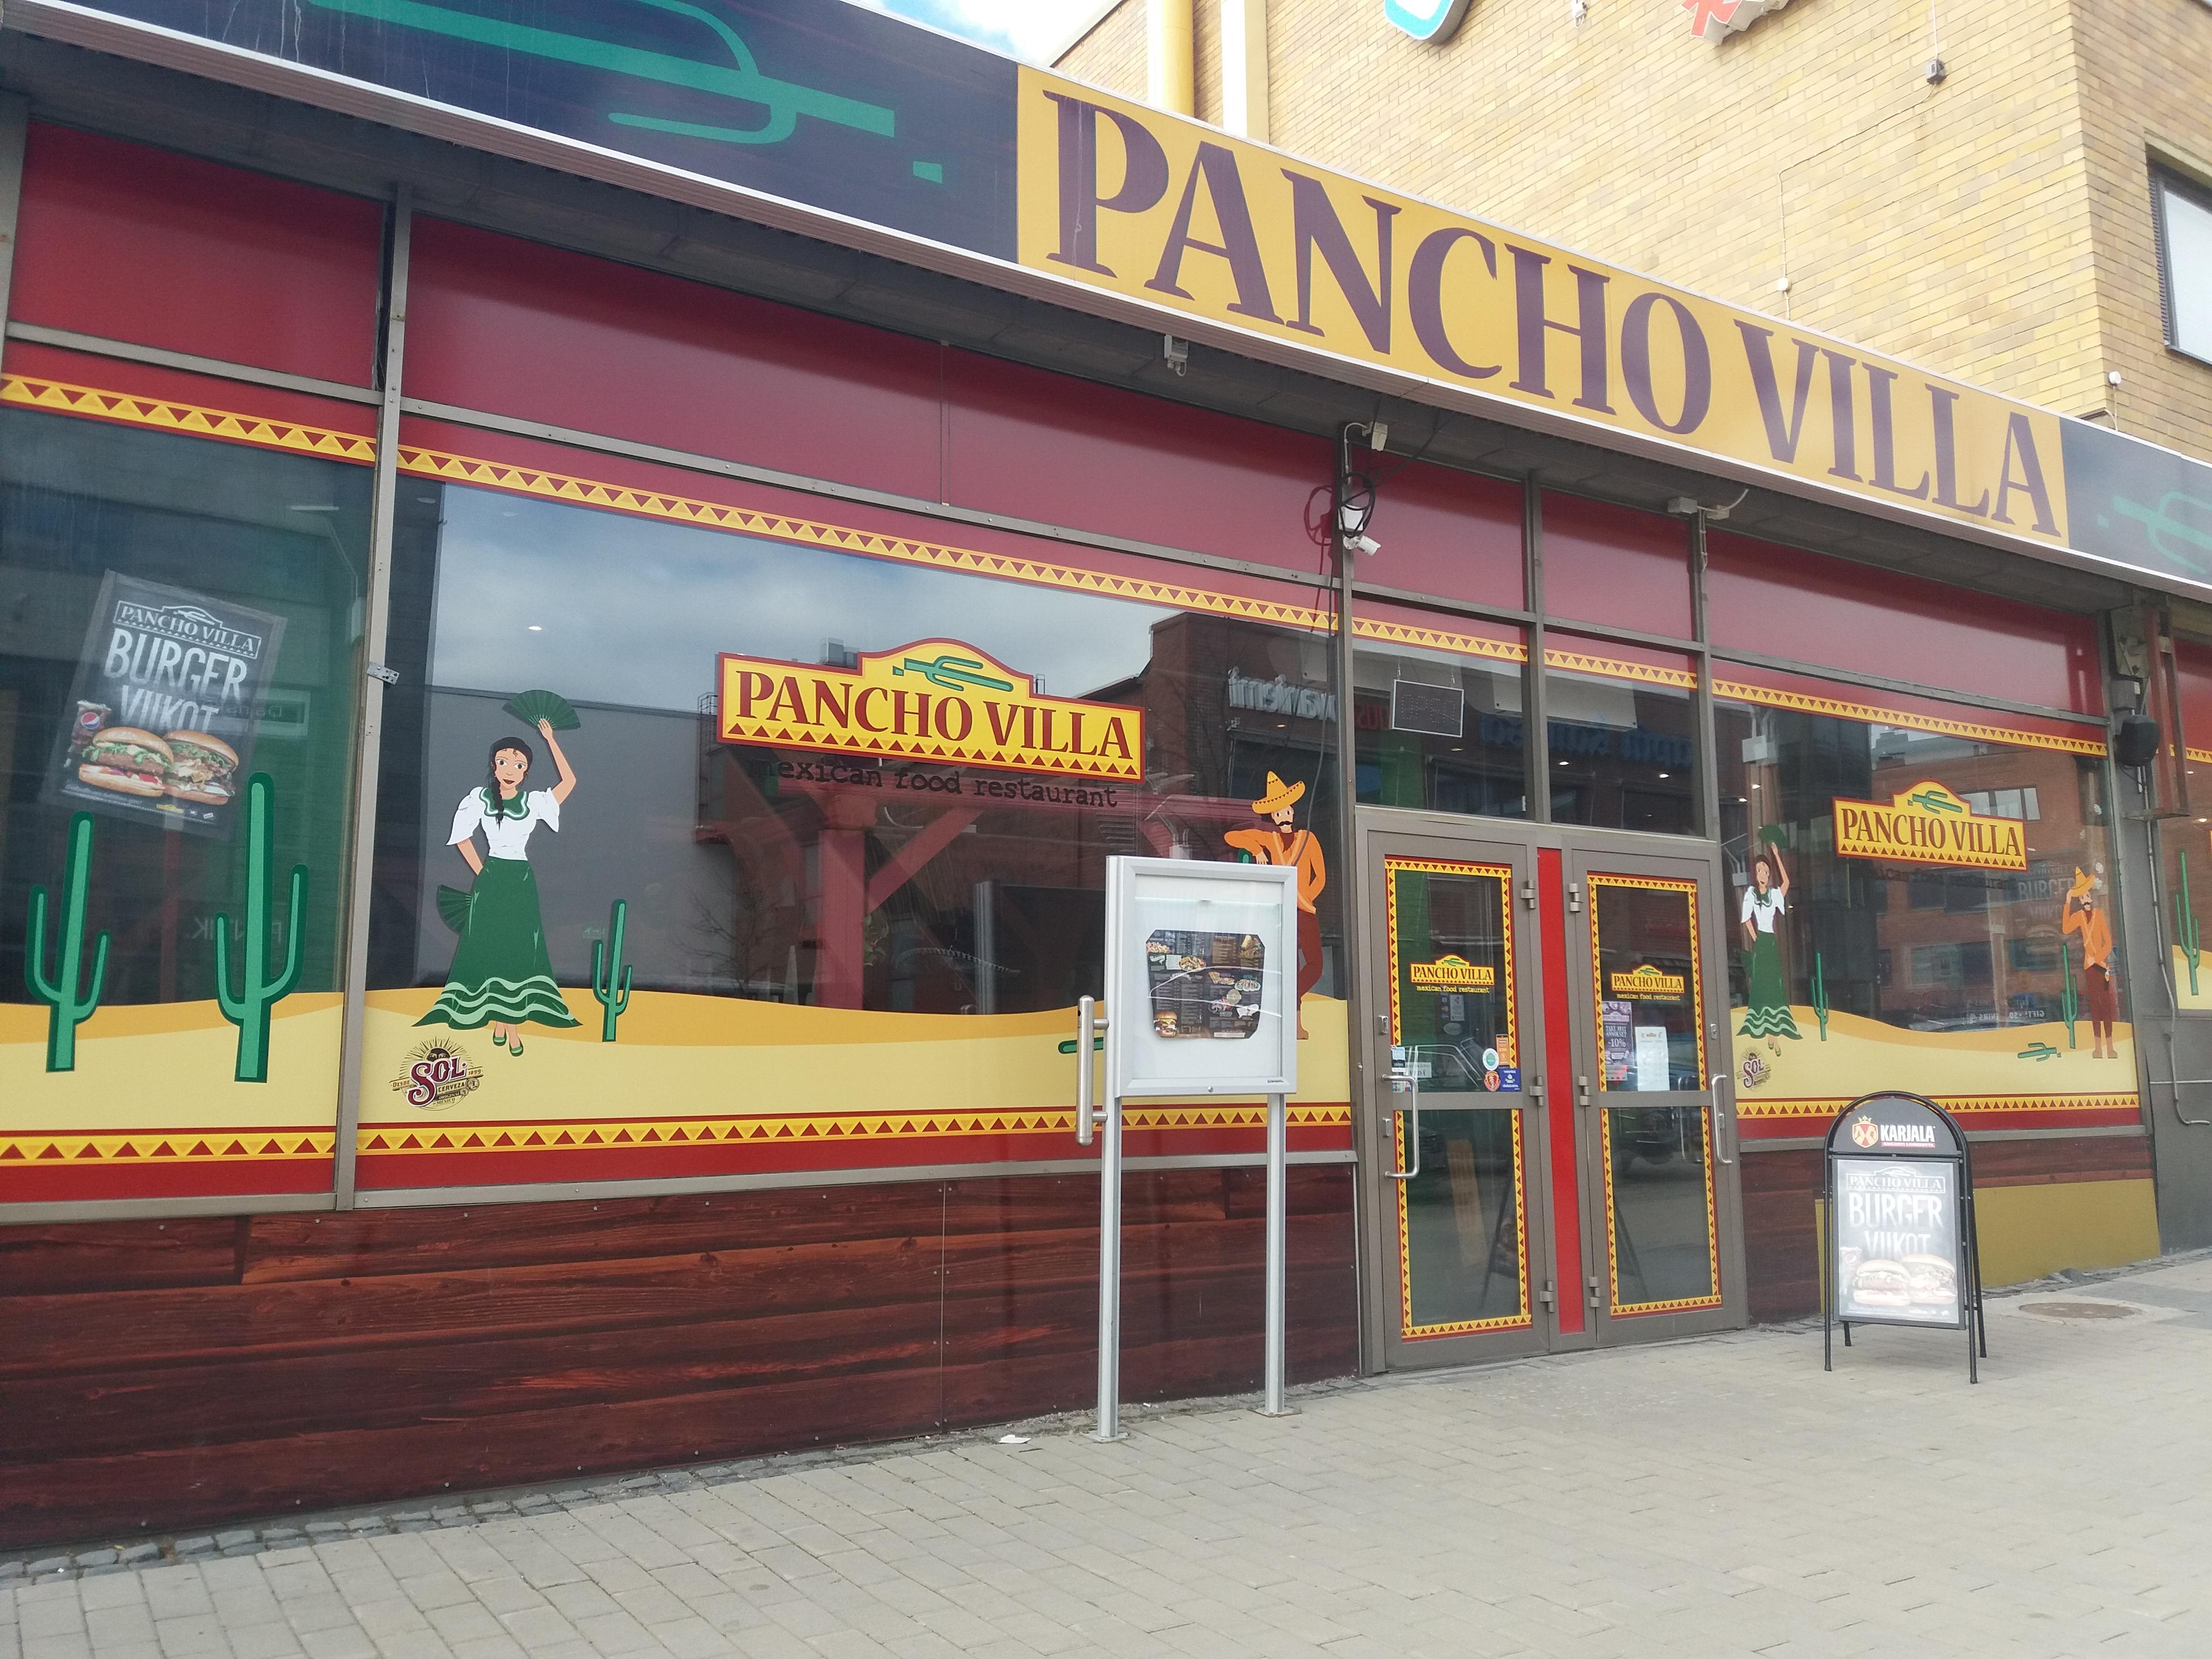 Cover image of this place Pancho Villa- Mexican Restaurant